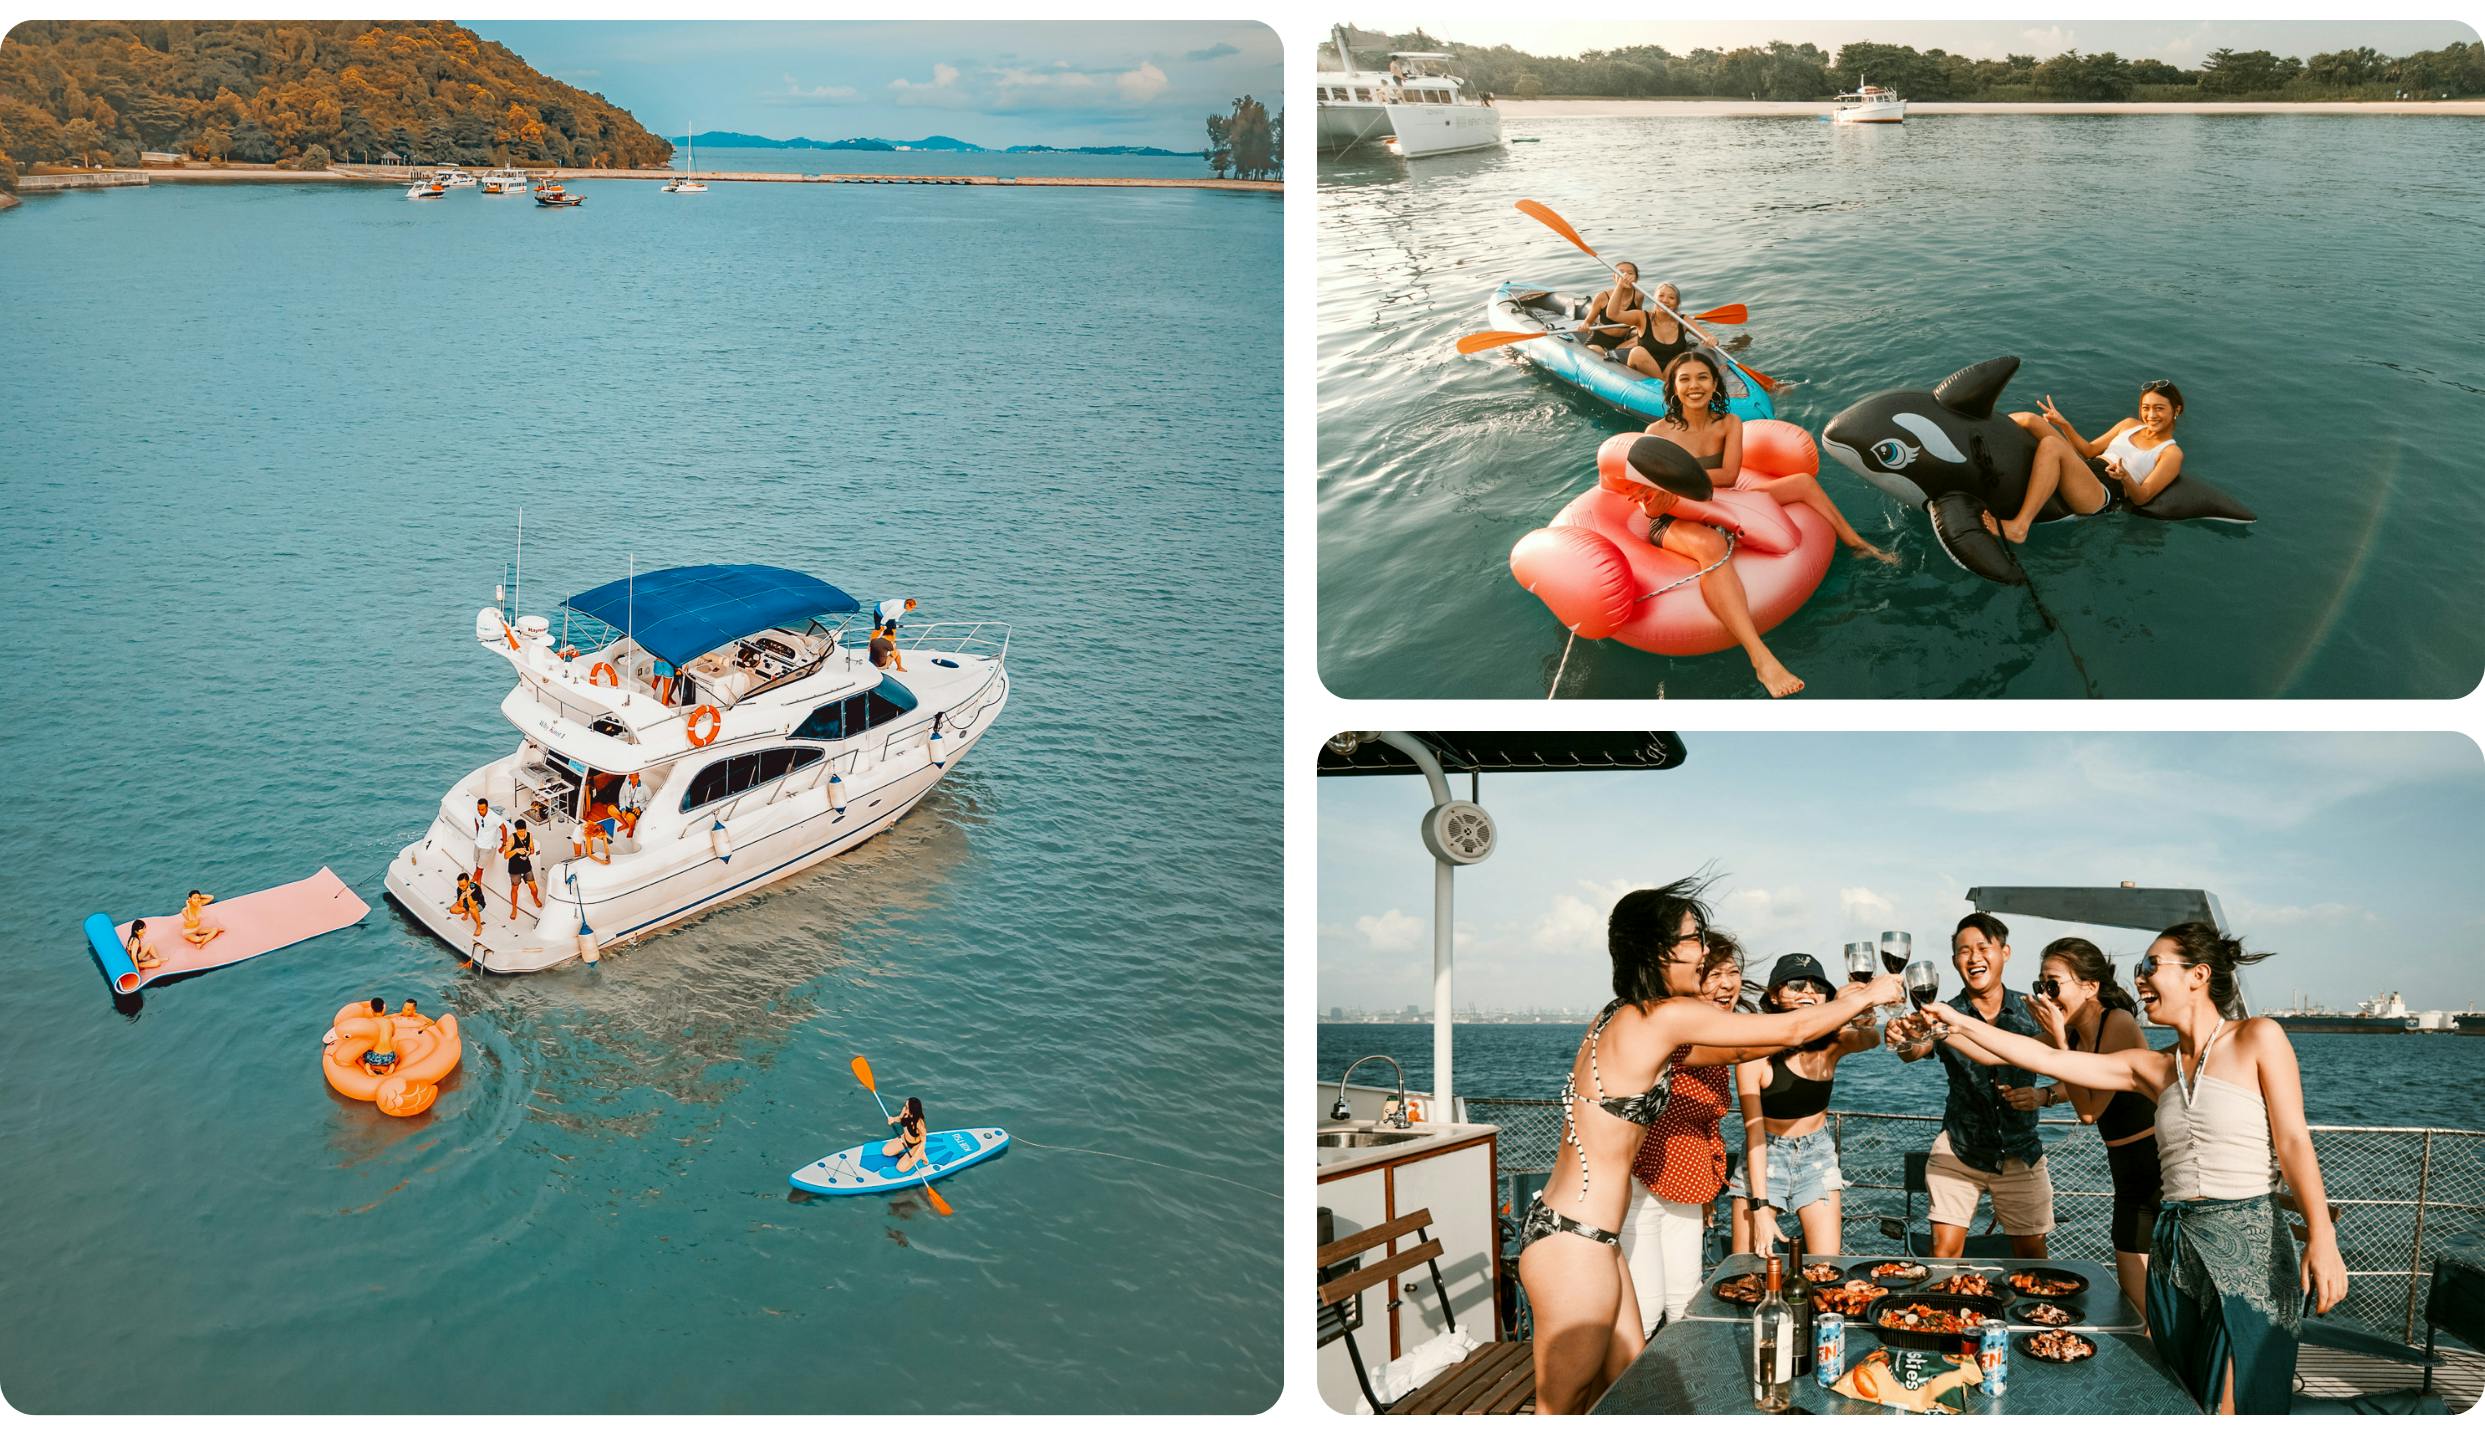 Go on a yacht to enjoy a day out on the water with BBQ and water activities!